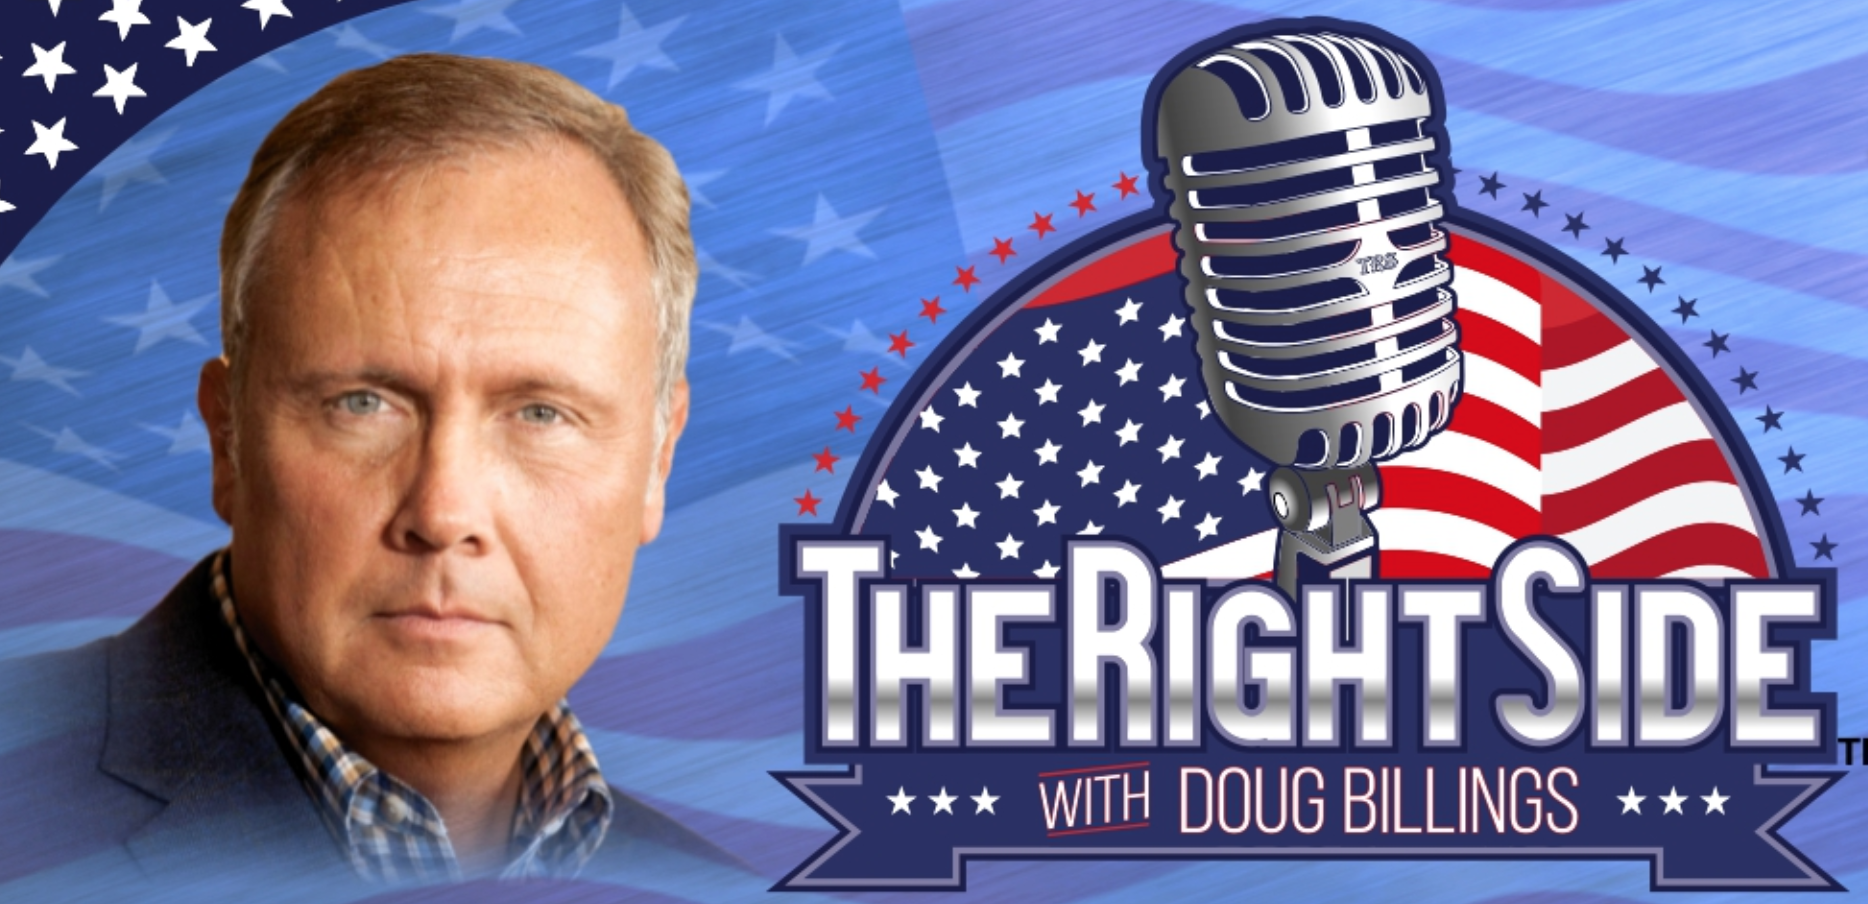 Who is Doug Billings? Meet the Right Side podcaster